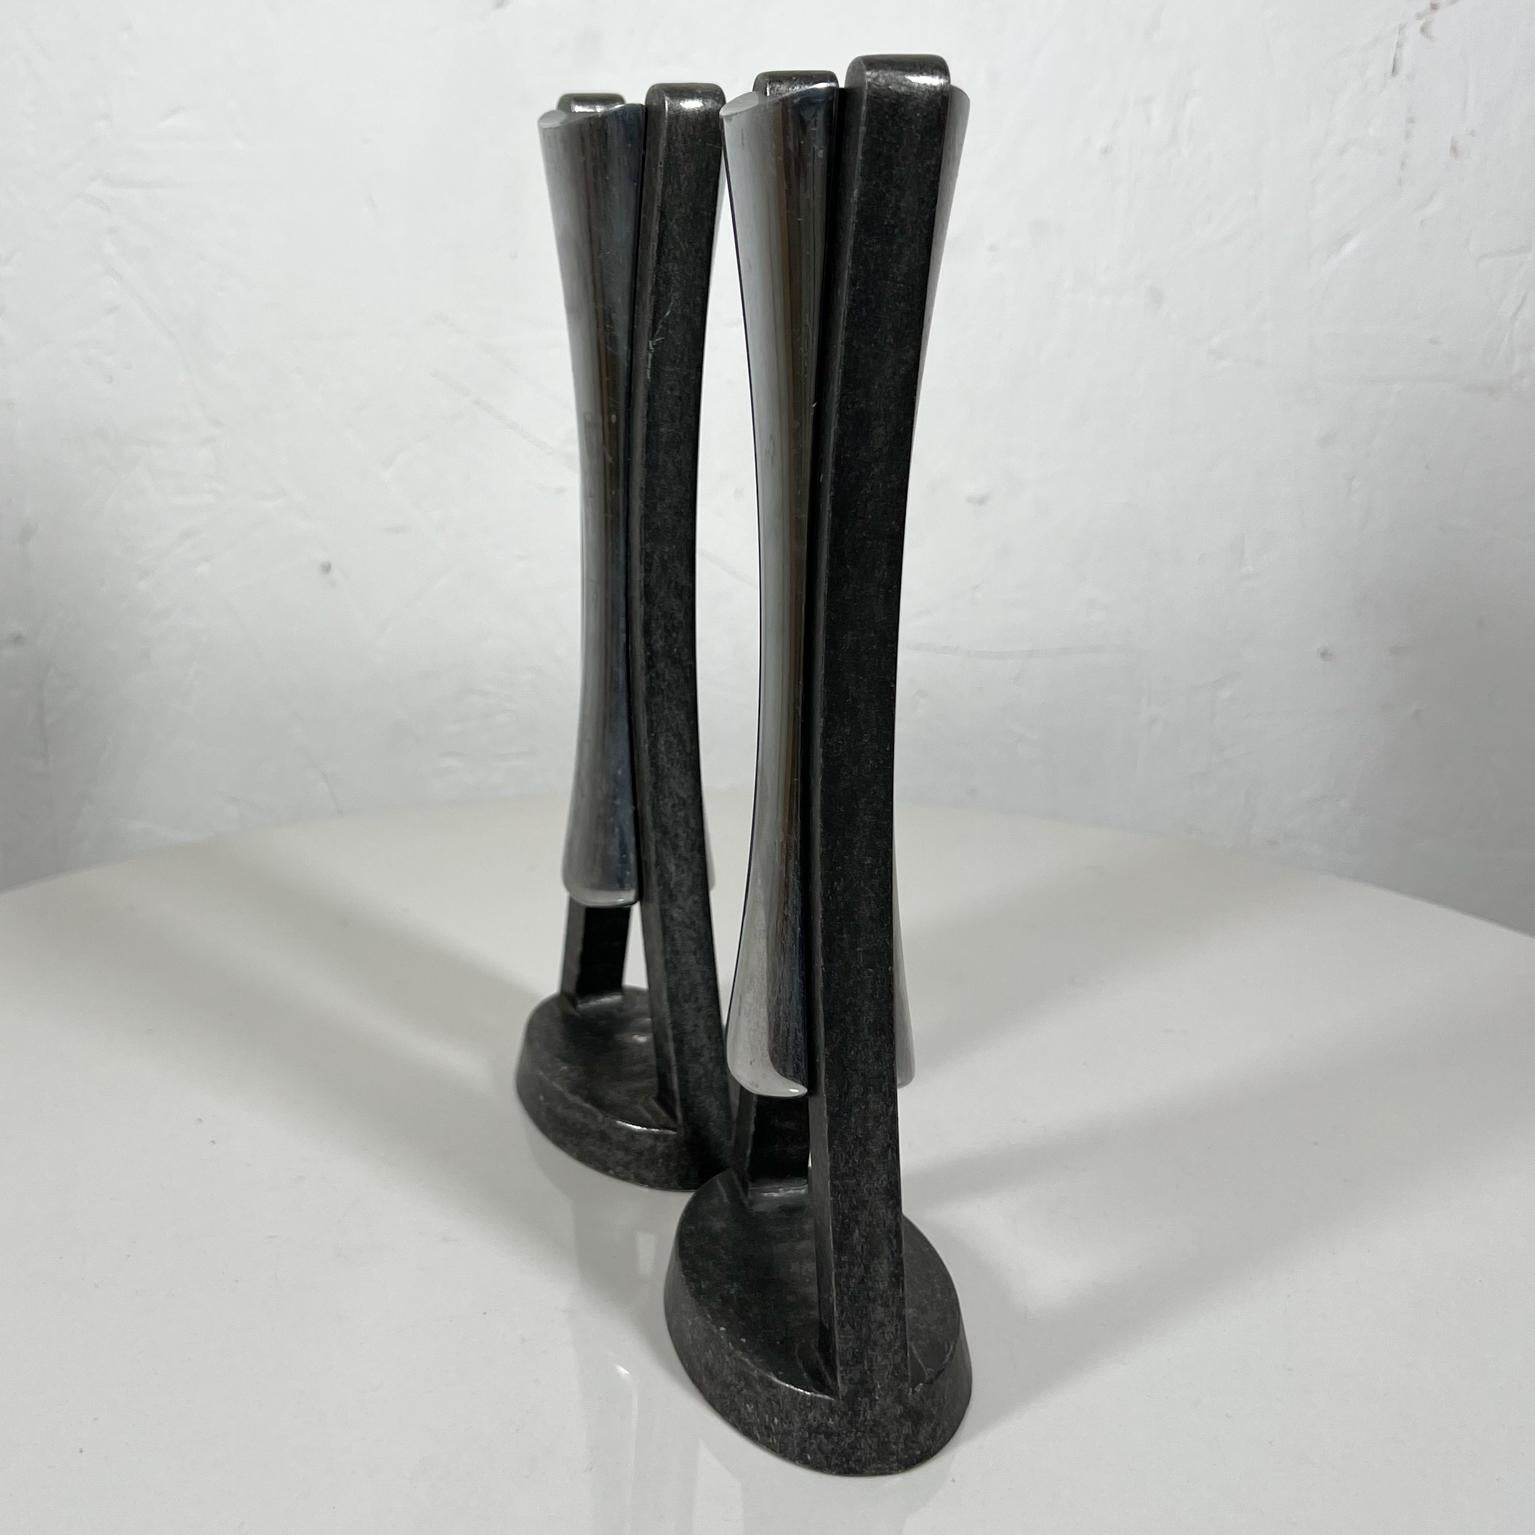 American 2010 Modern Vintage Nambe Sculptural Candle Holders by Neil Cohen